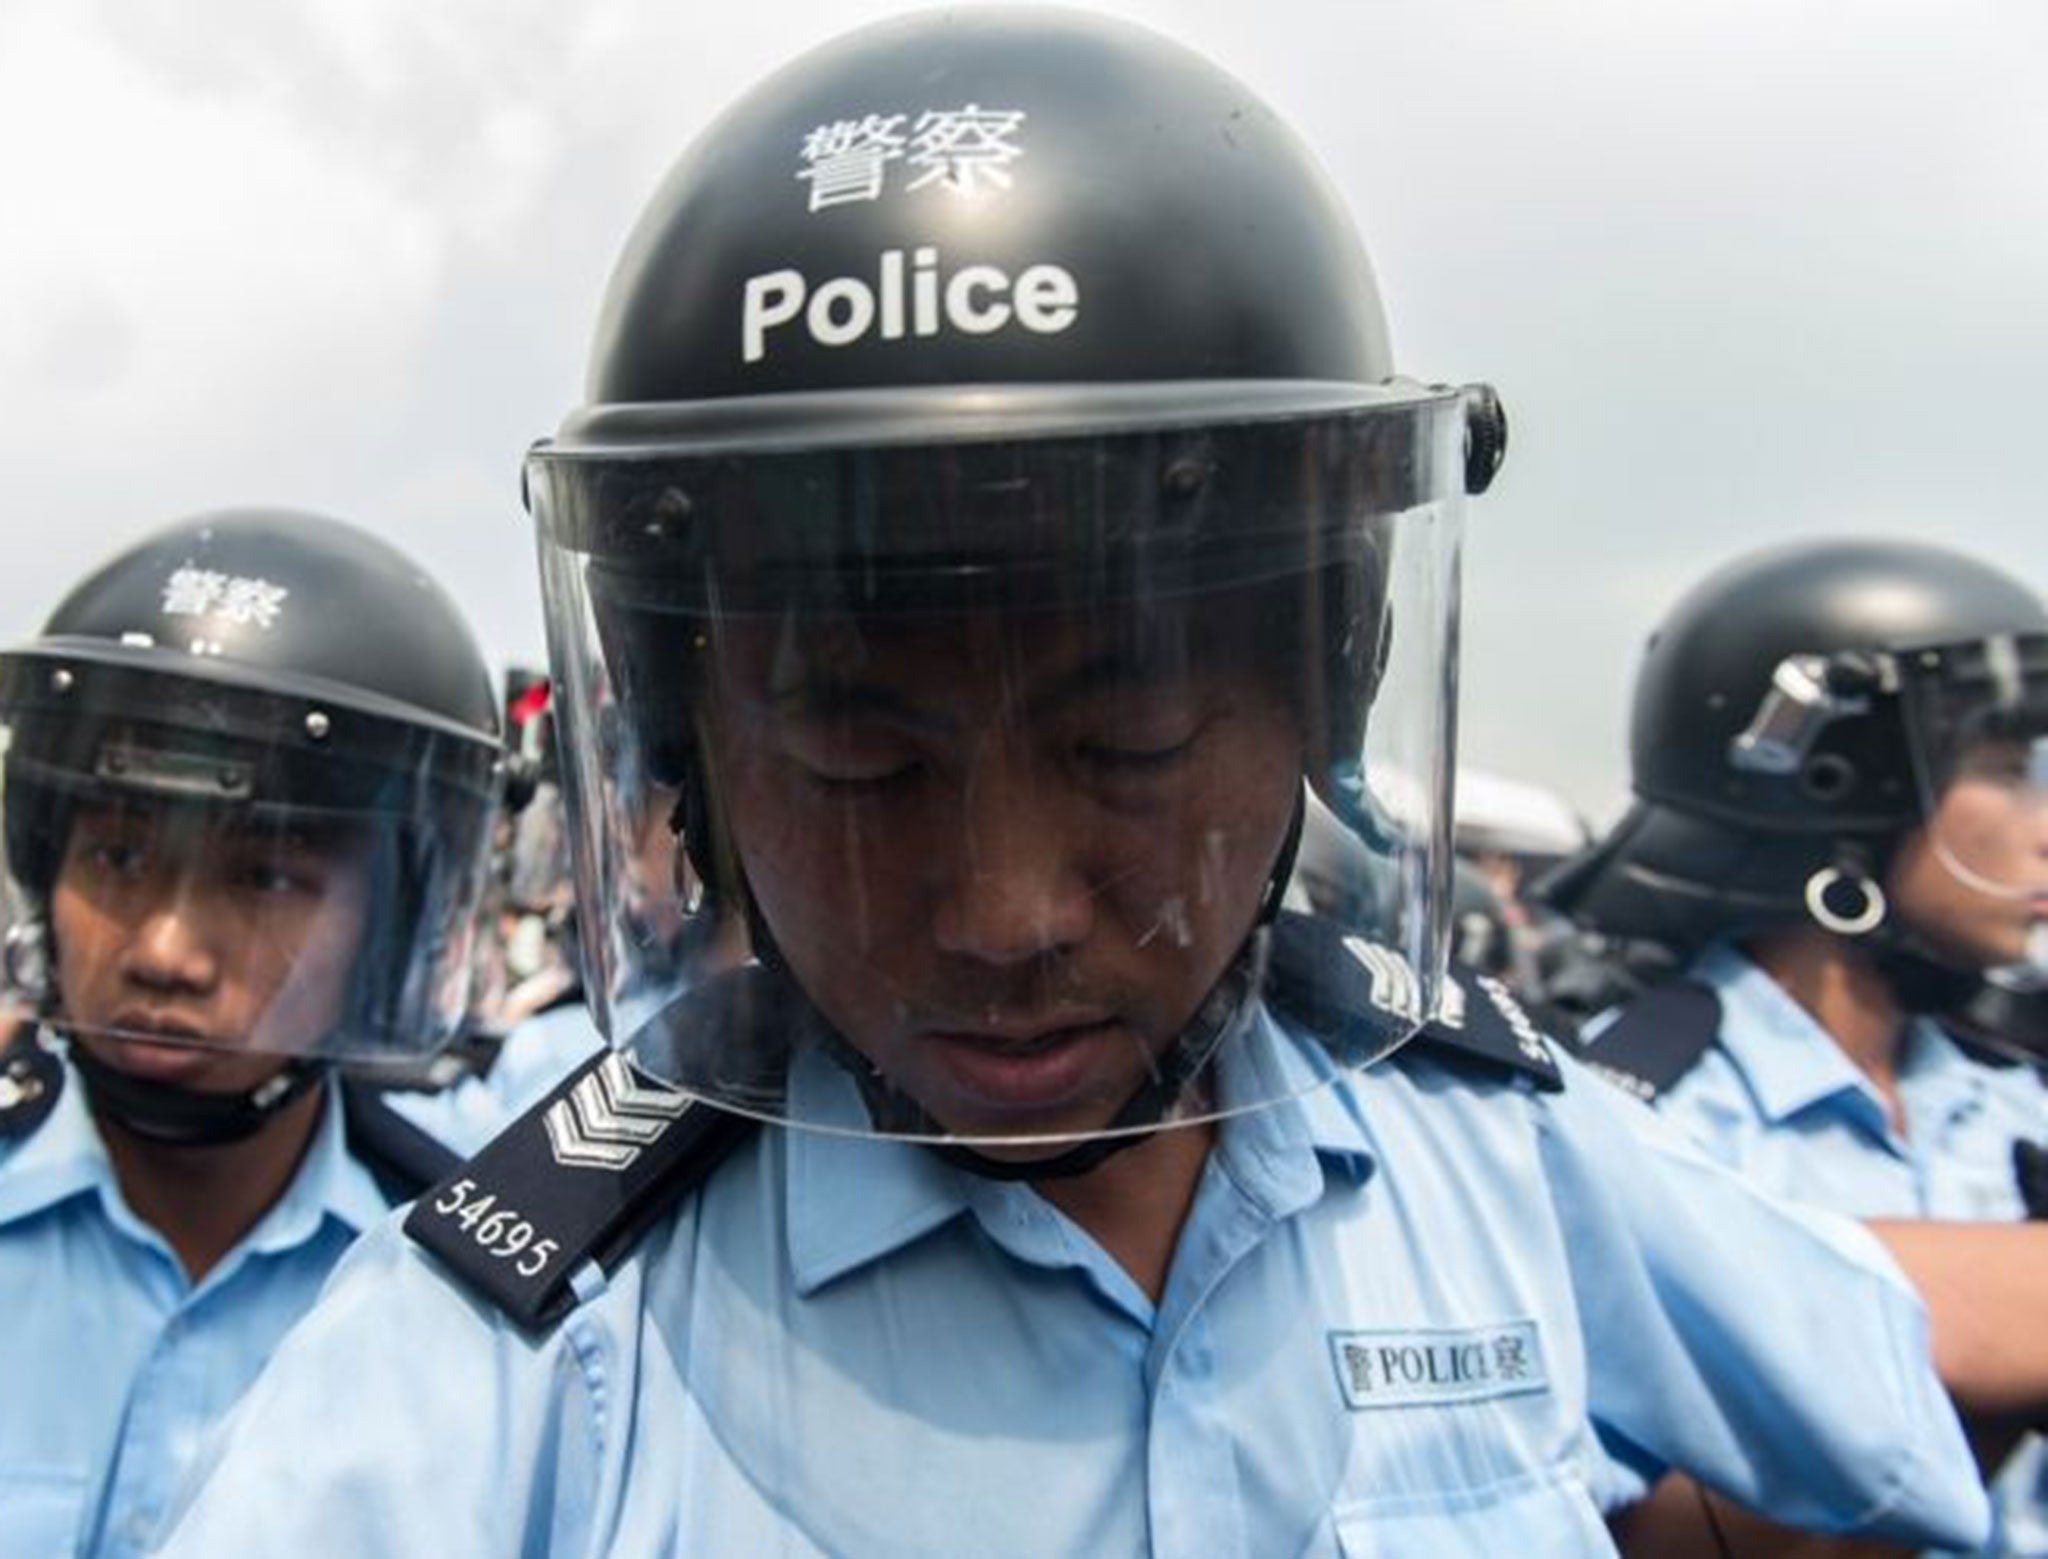 Police form a line to make way for an ambulance as pro-democracy protestors shout slogans outside the government headquarters in Hong Kong on October 3